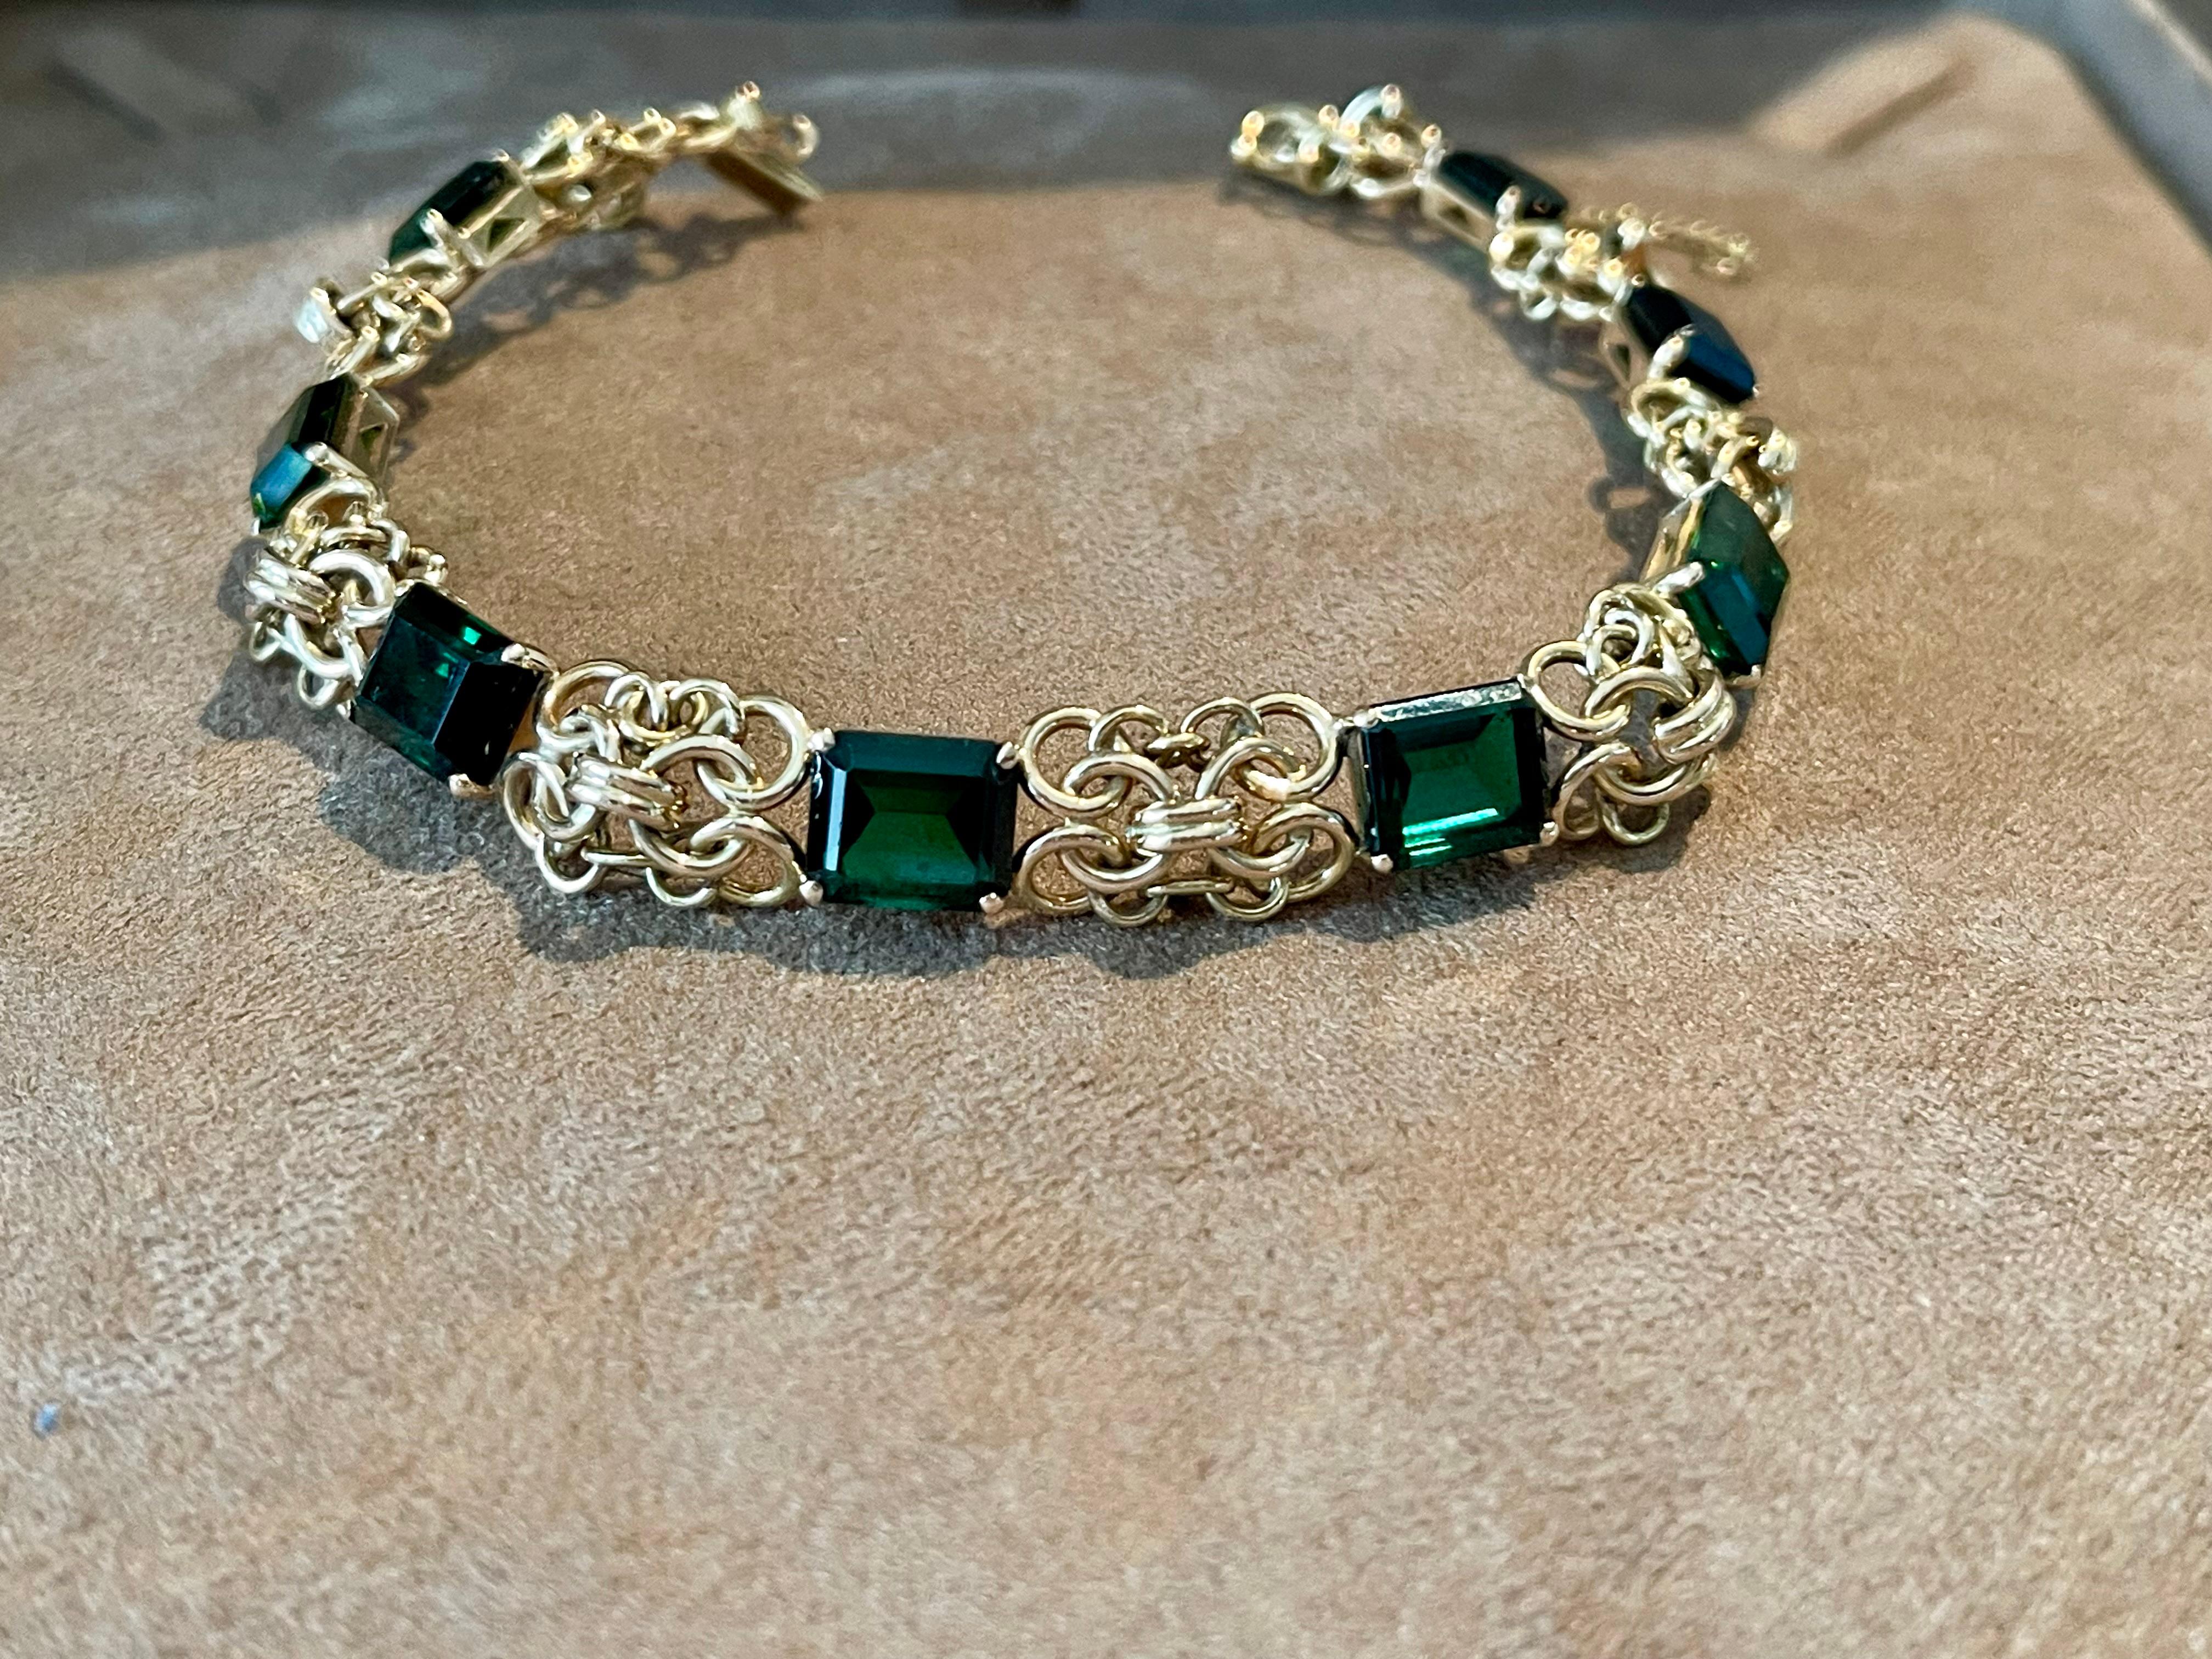 A wonderful 18 K rose Gold retro Bracelet from 1950 featuring 8 green emerald cut Tourmalines. The size of the torumalines is slightly greaduating towards the centre. Wonderful and intricate workmanship with gold wires typical for this period.